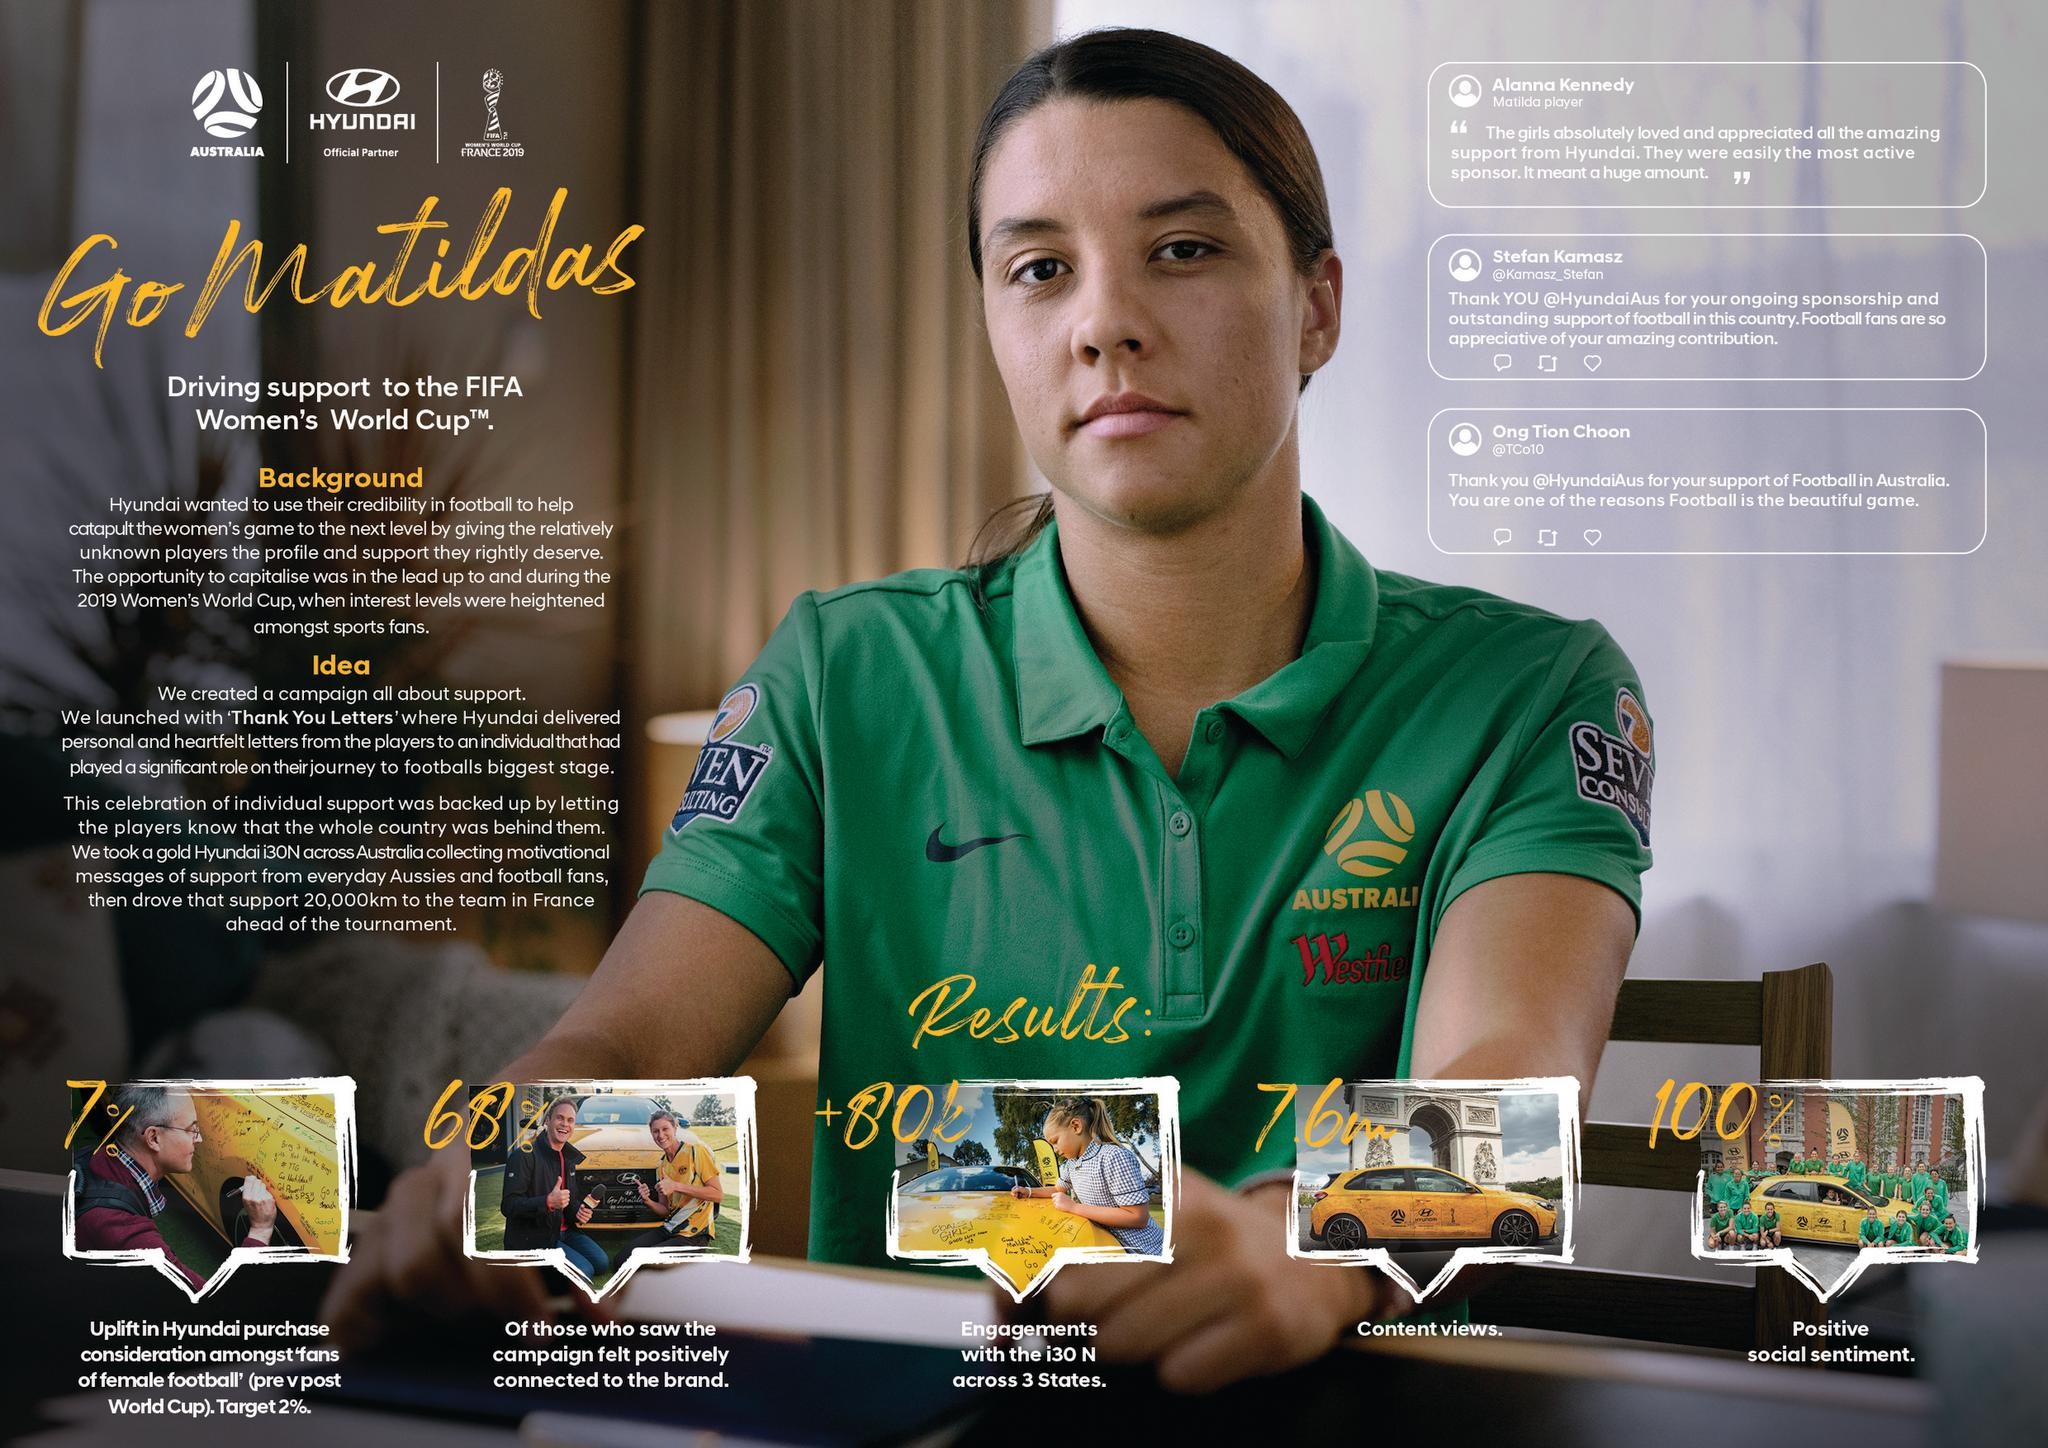 Go Matildas: Driving support to the FIFA Women's World Cup